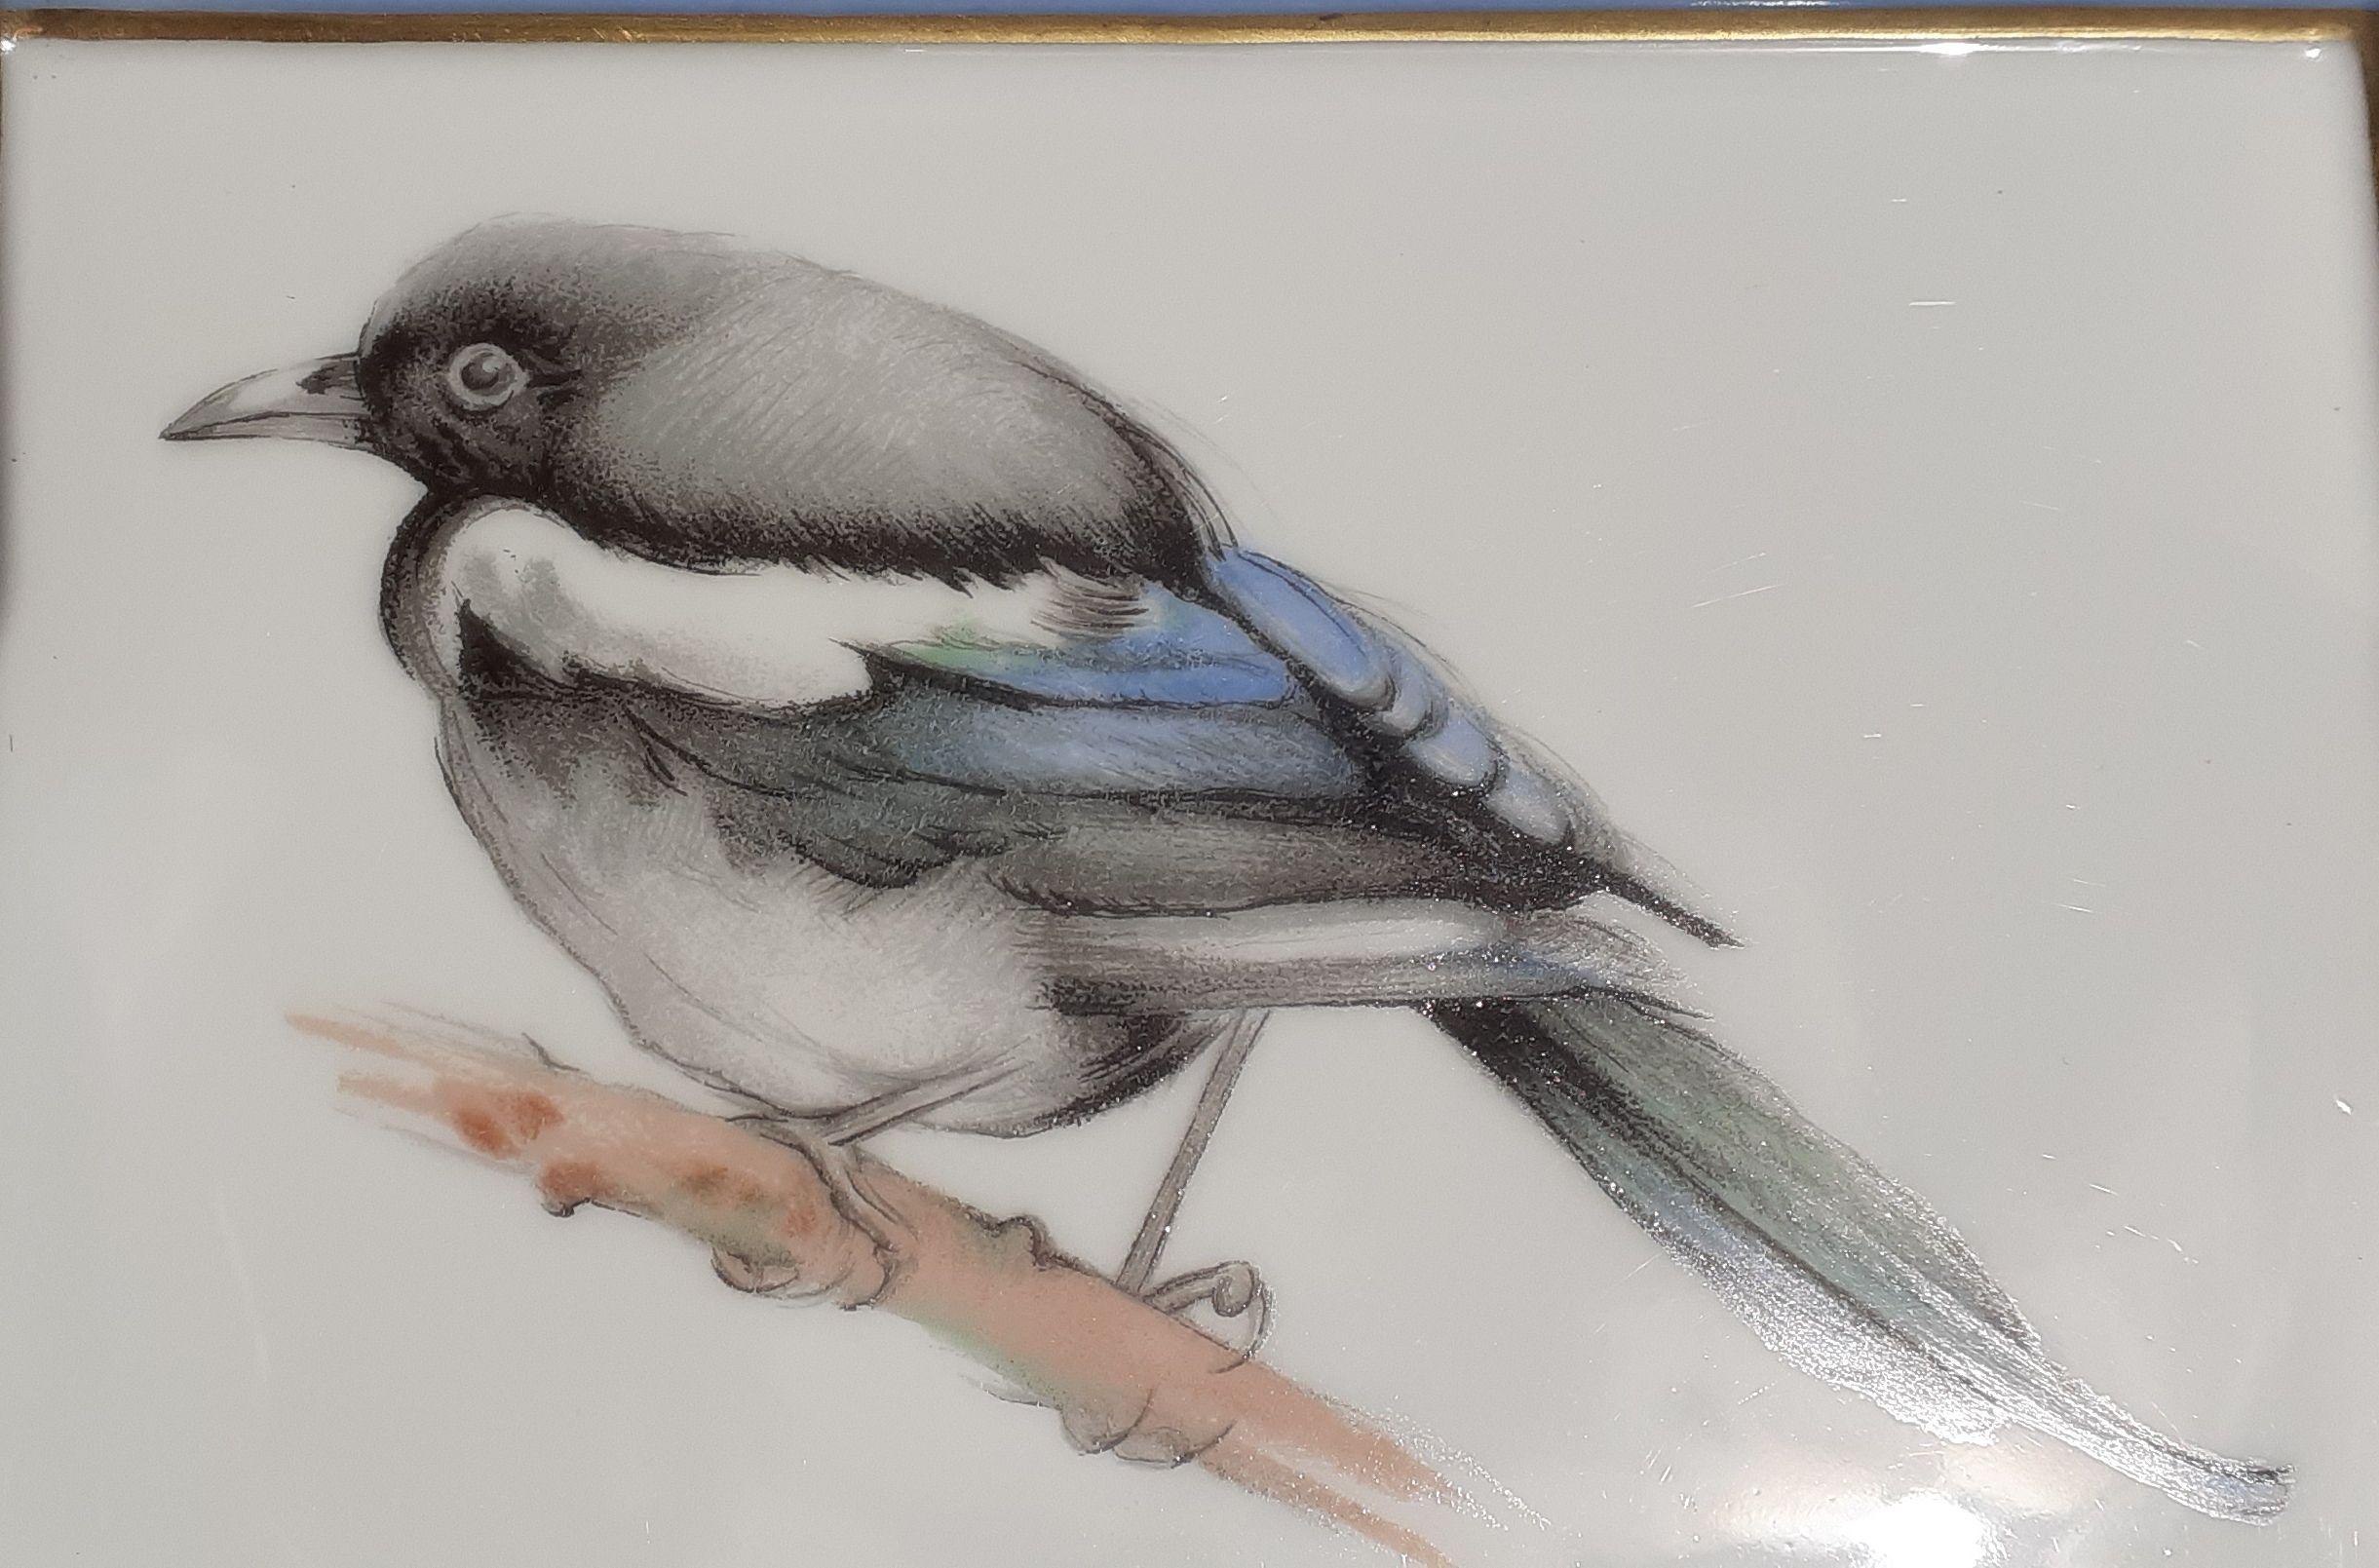 Rare and Beautiful Authentic Hermès Ashtray

Print: Tit (Mésange)

Drawing by Xavier de Poret

Made in France

Vintage item

Made of printed porcelain and edges gilded with fine gold

Grey suede leather at back, golden 